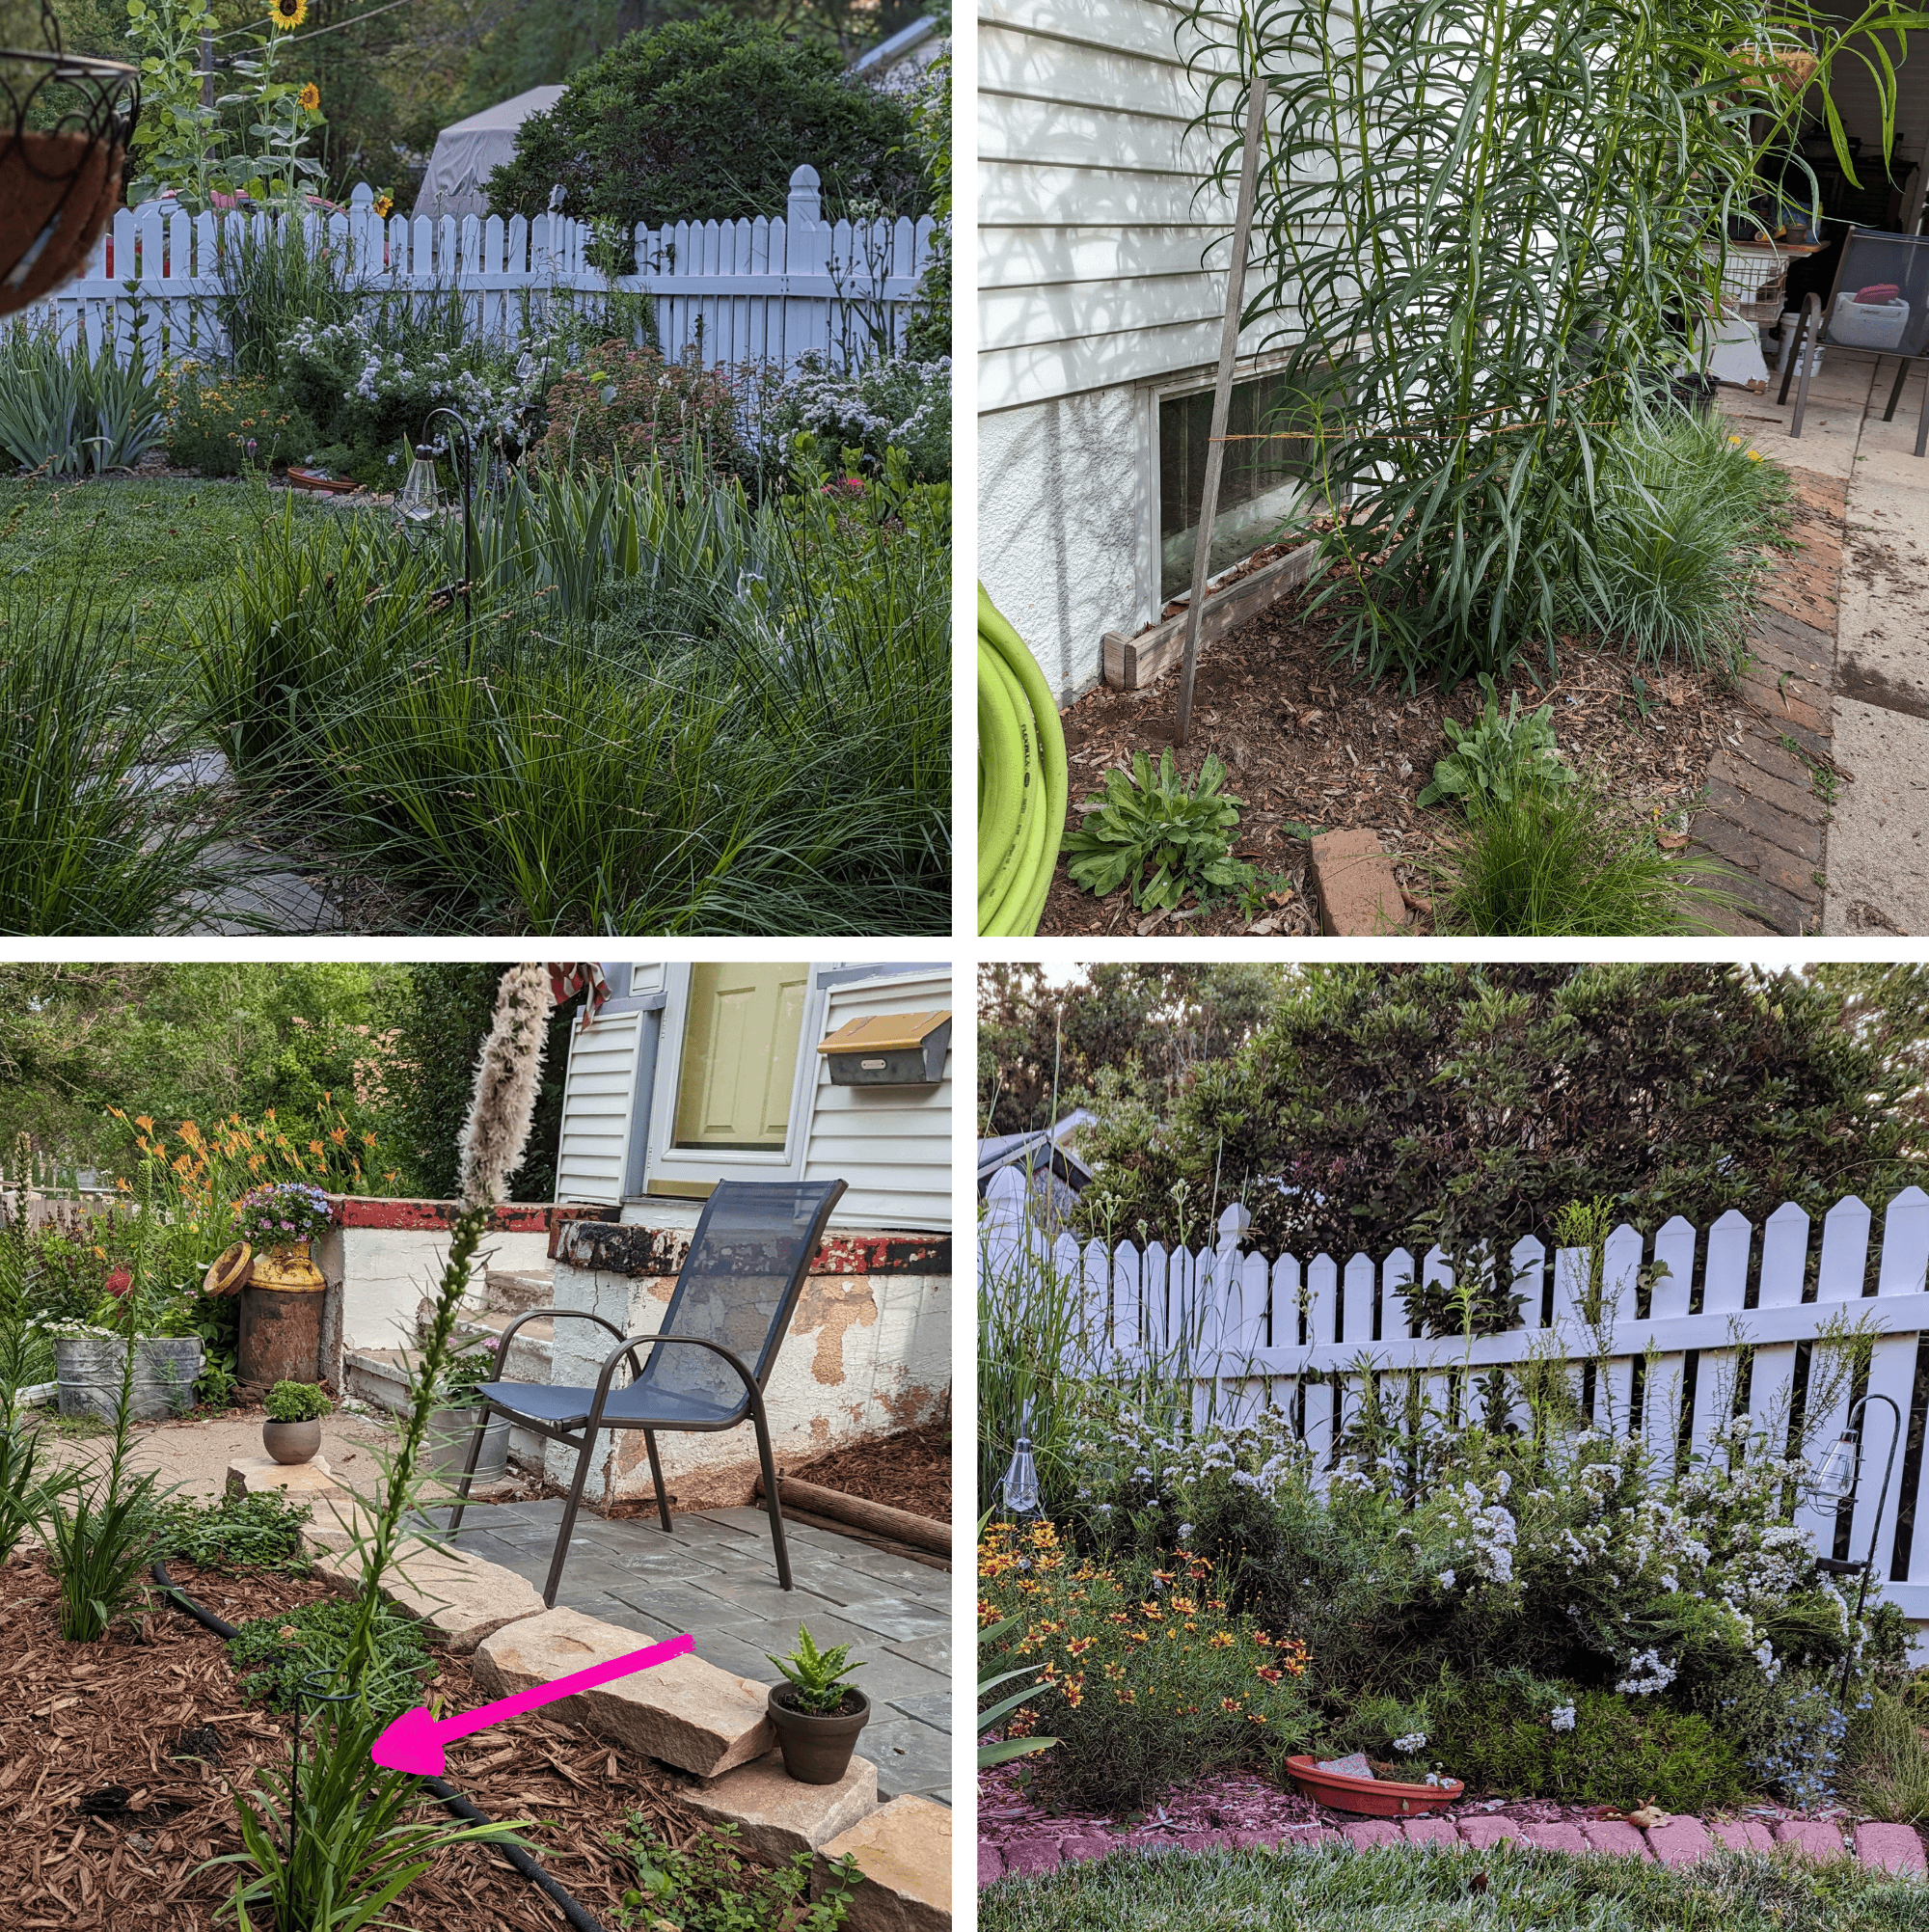 Photos clockwise from top left: these sedges were flopping with nothing in the middle until I cut them back- now they are filling in nicely; twine is a low profile and biodegradable way to support floppy plants; metal plant supports can blend in well; the